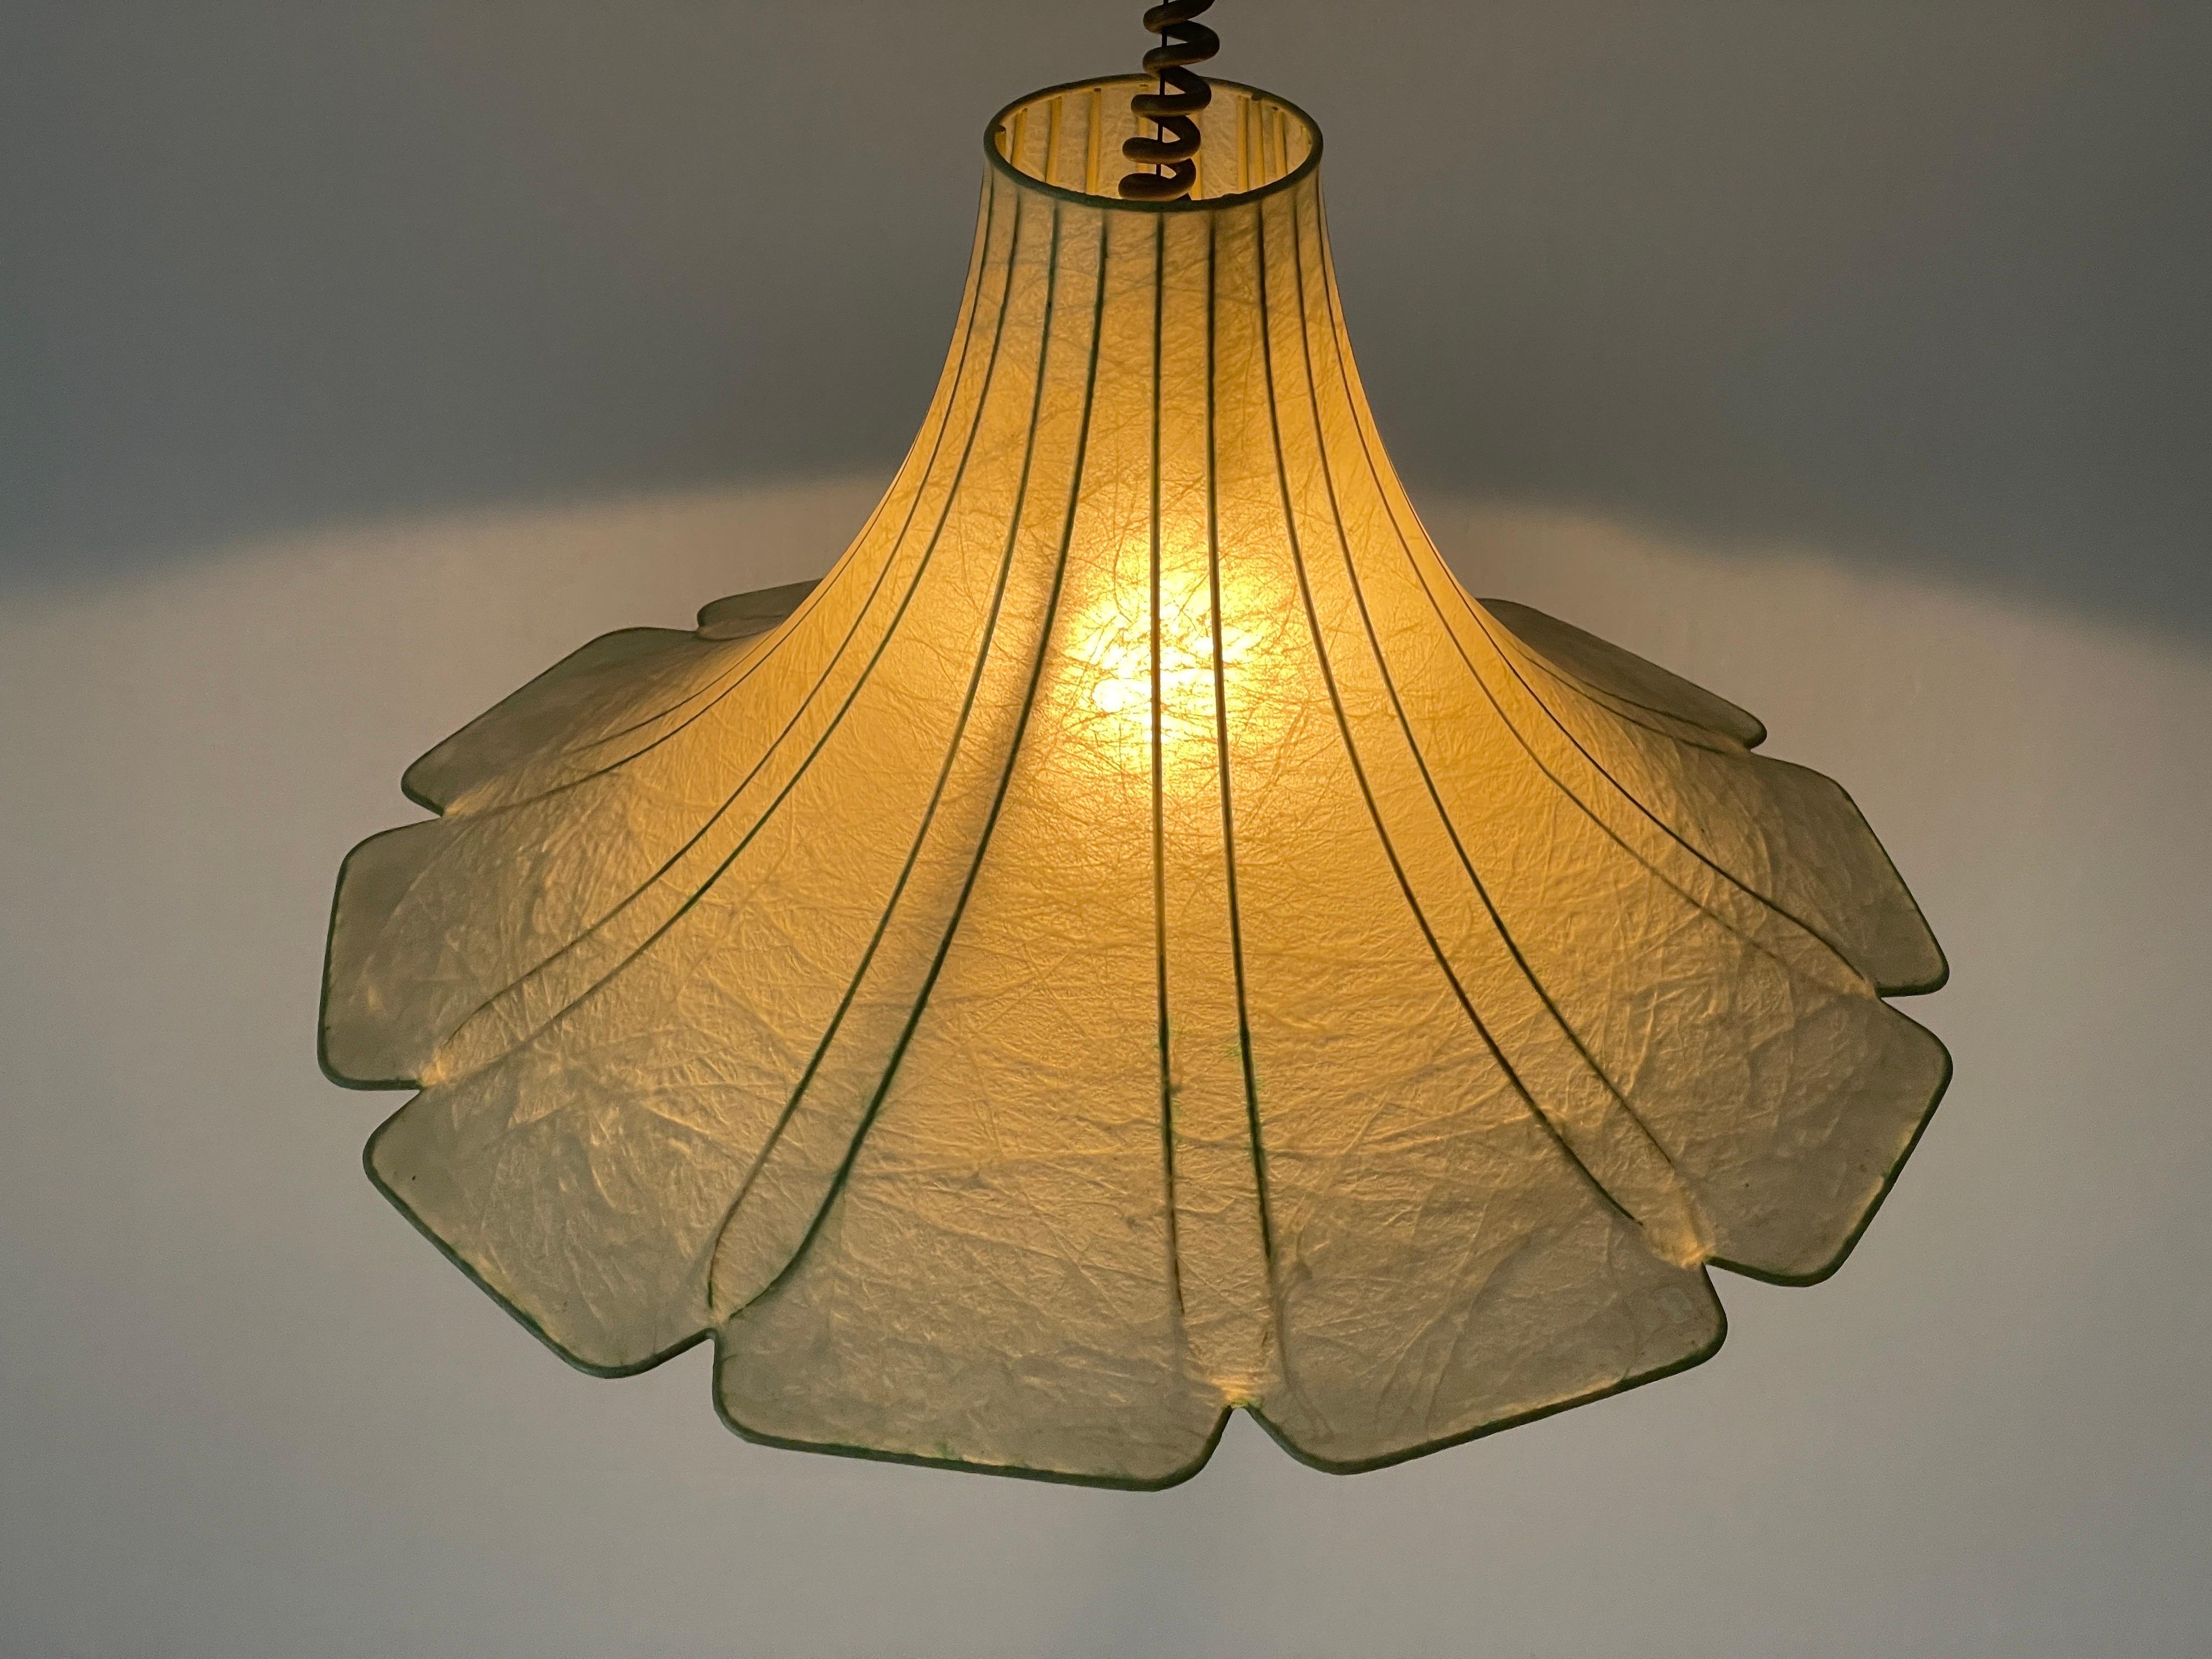 Tulip Design Cocoon Adjustable Height Pendant Lamp by Goldkant, 1960s, Germany For Sale 5